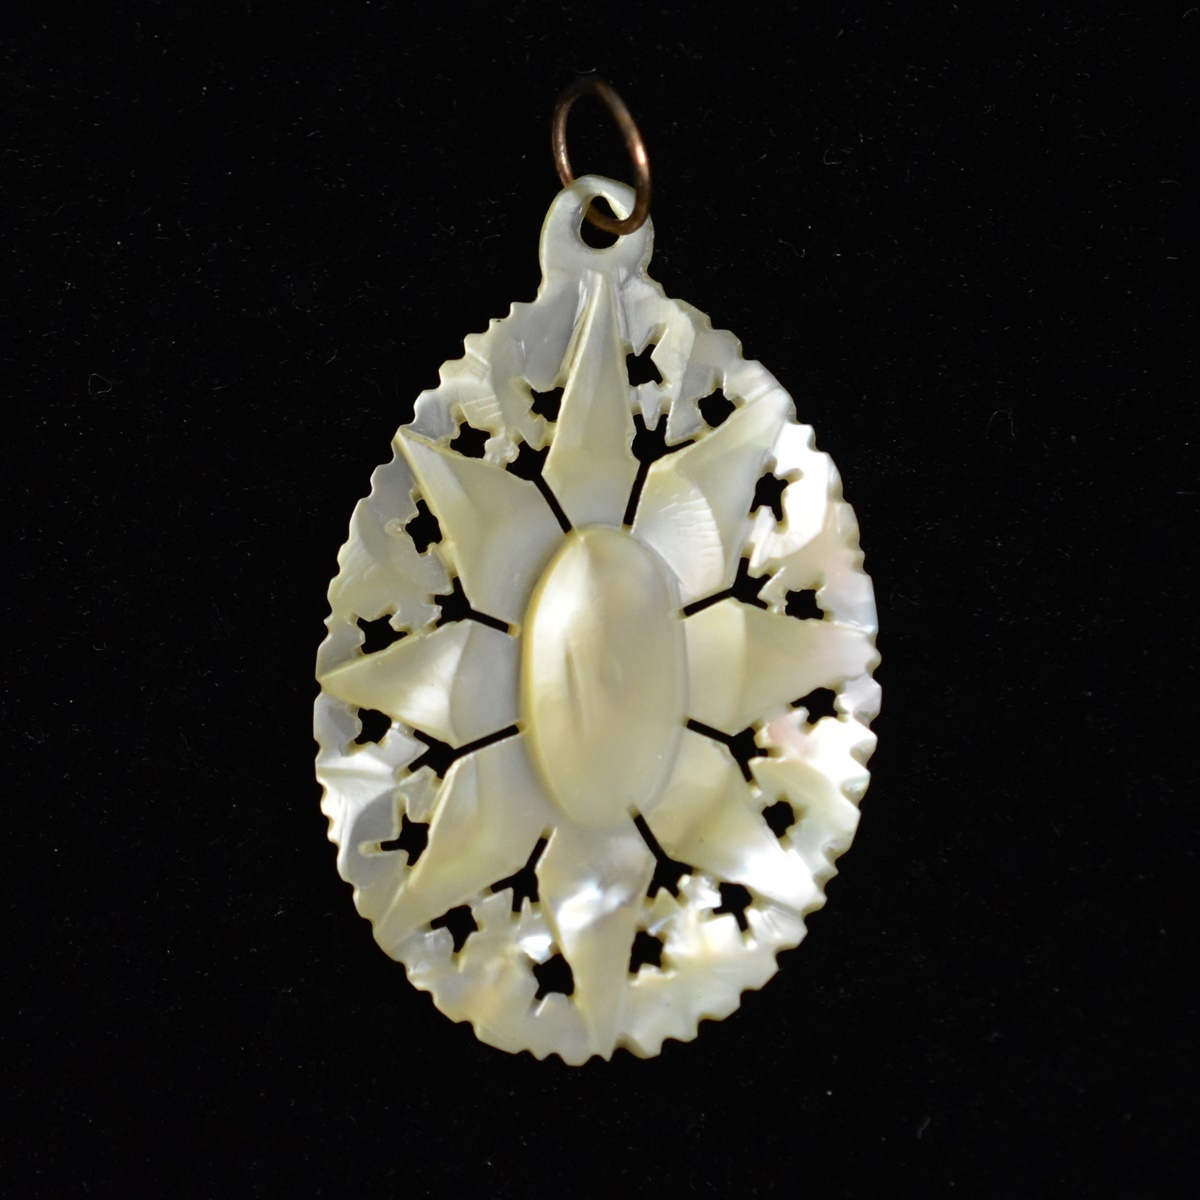  antique betsure Hem pearl White Butterfly ./ mother ob pearl /... star / Star. pendant top / charm genuine article guarantee 